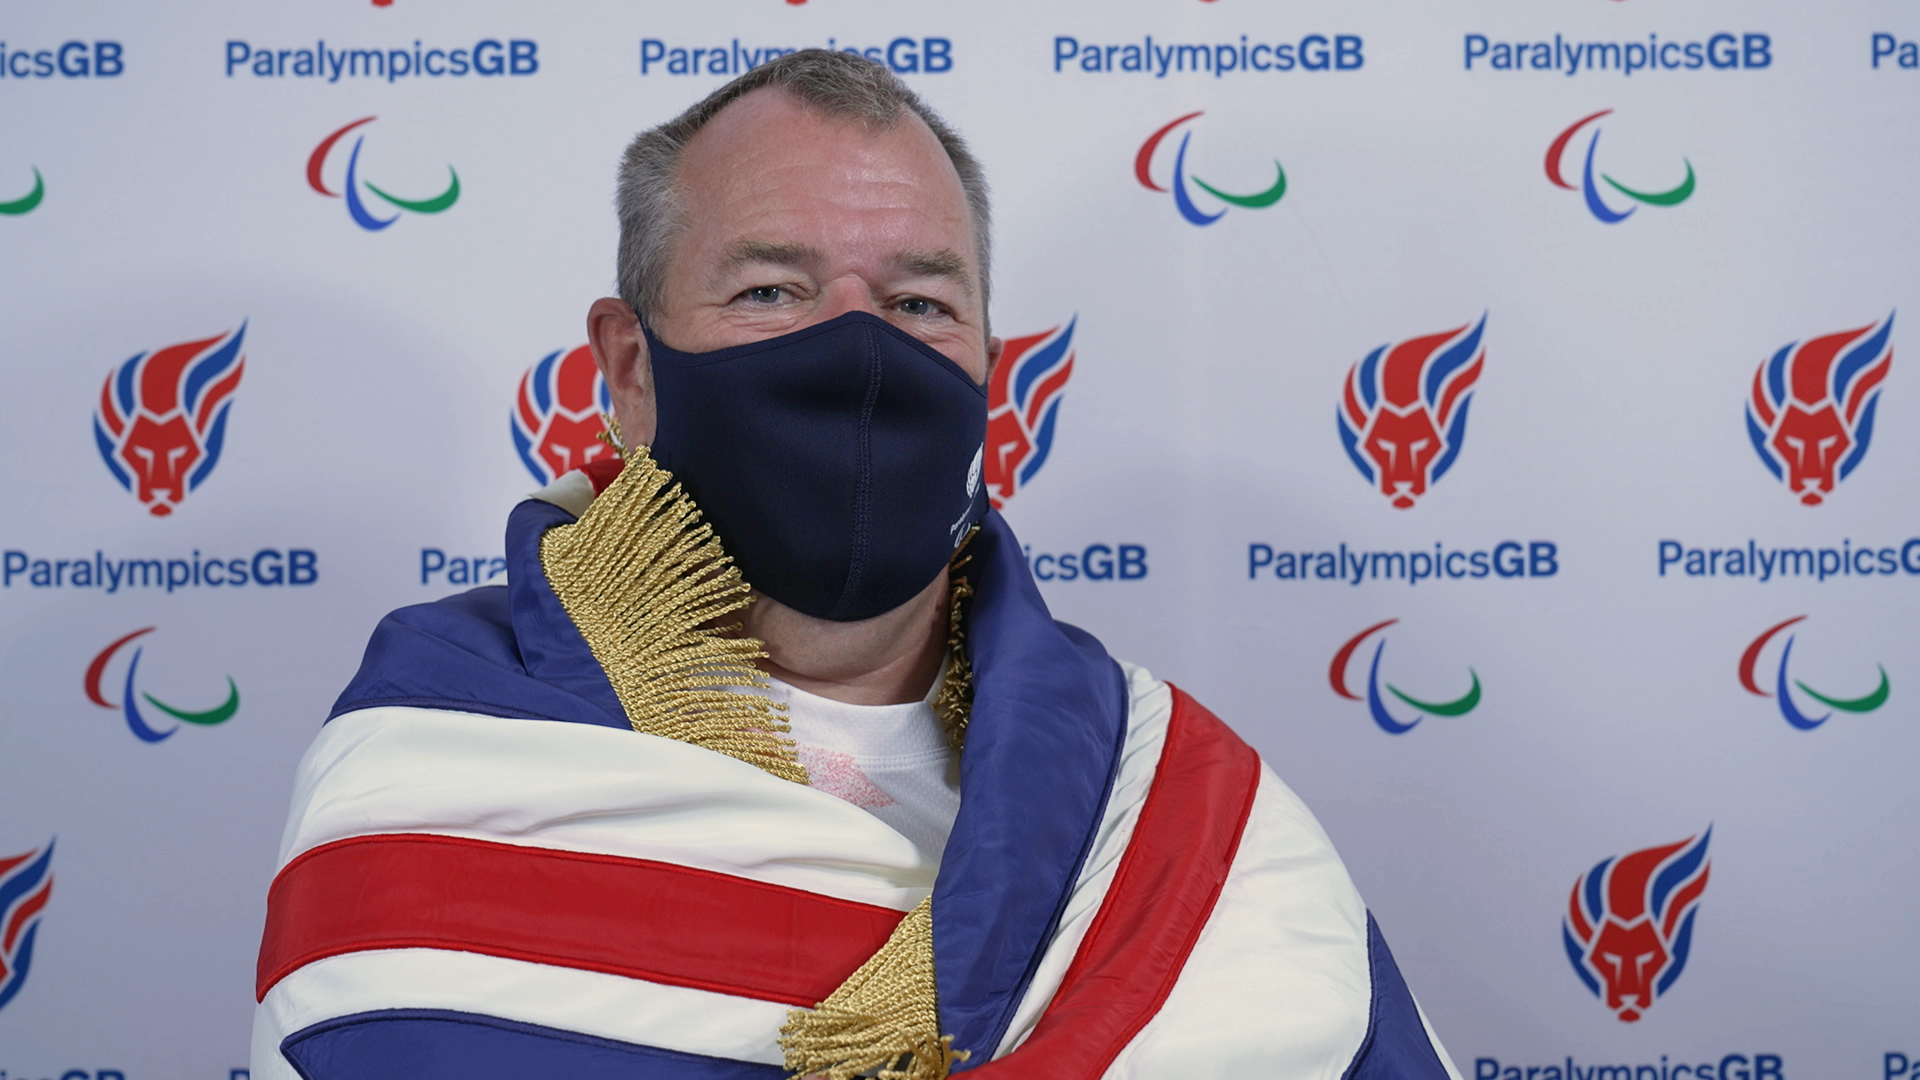 John Stubbs is the oldest member of the British team and is to compete at his fourth Paralympic Games ©ParalympicsGB